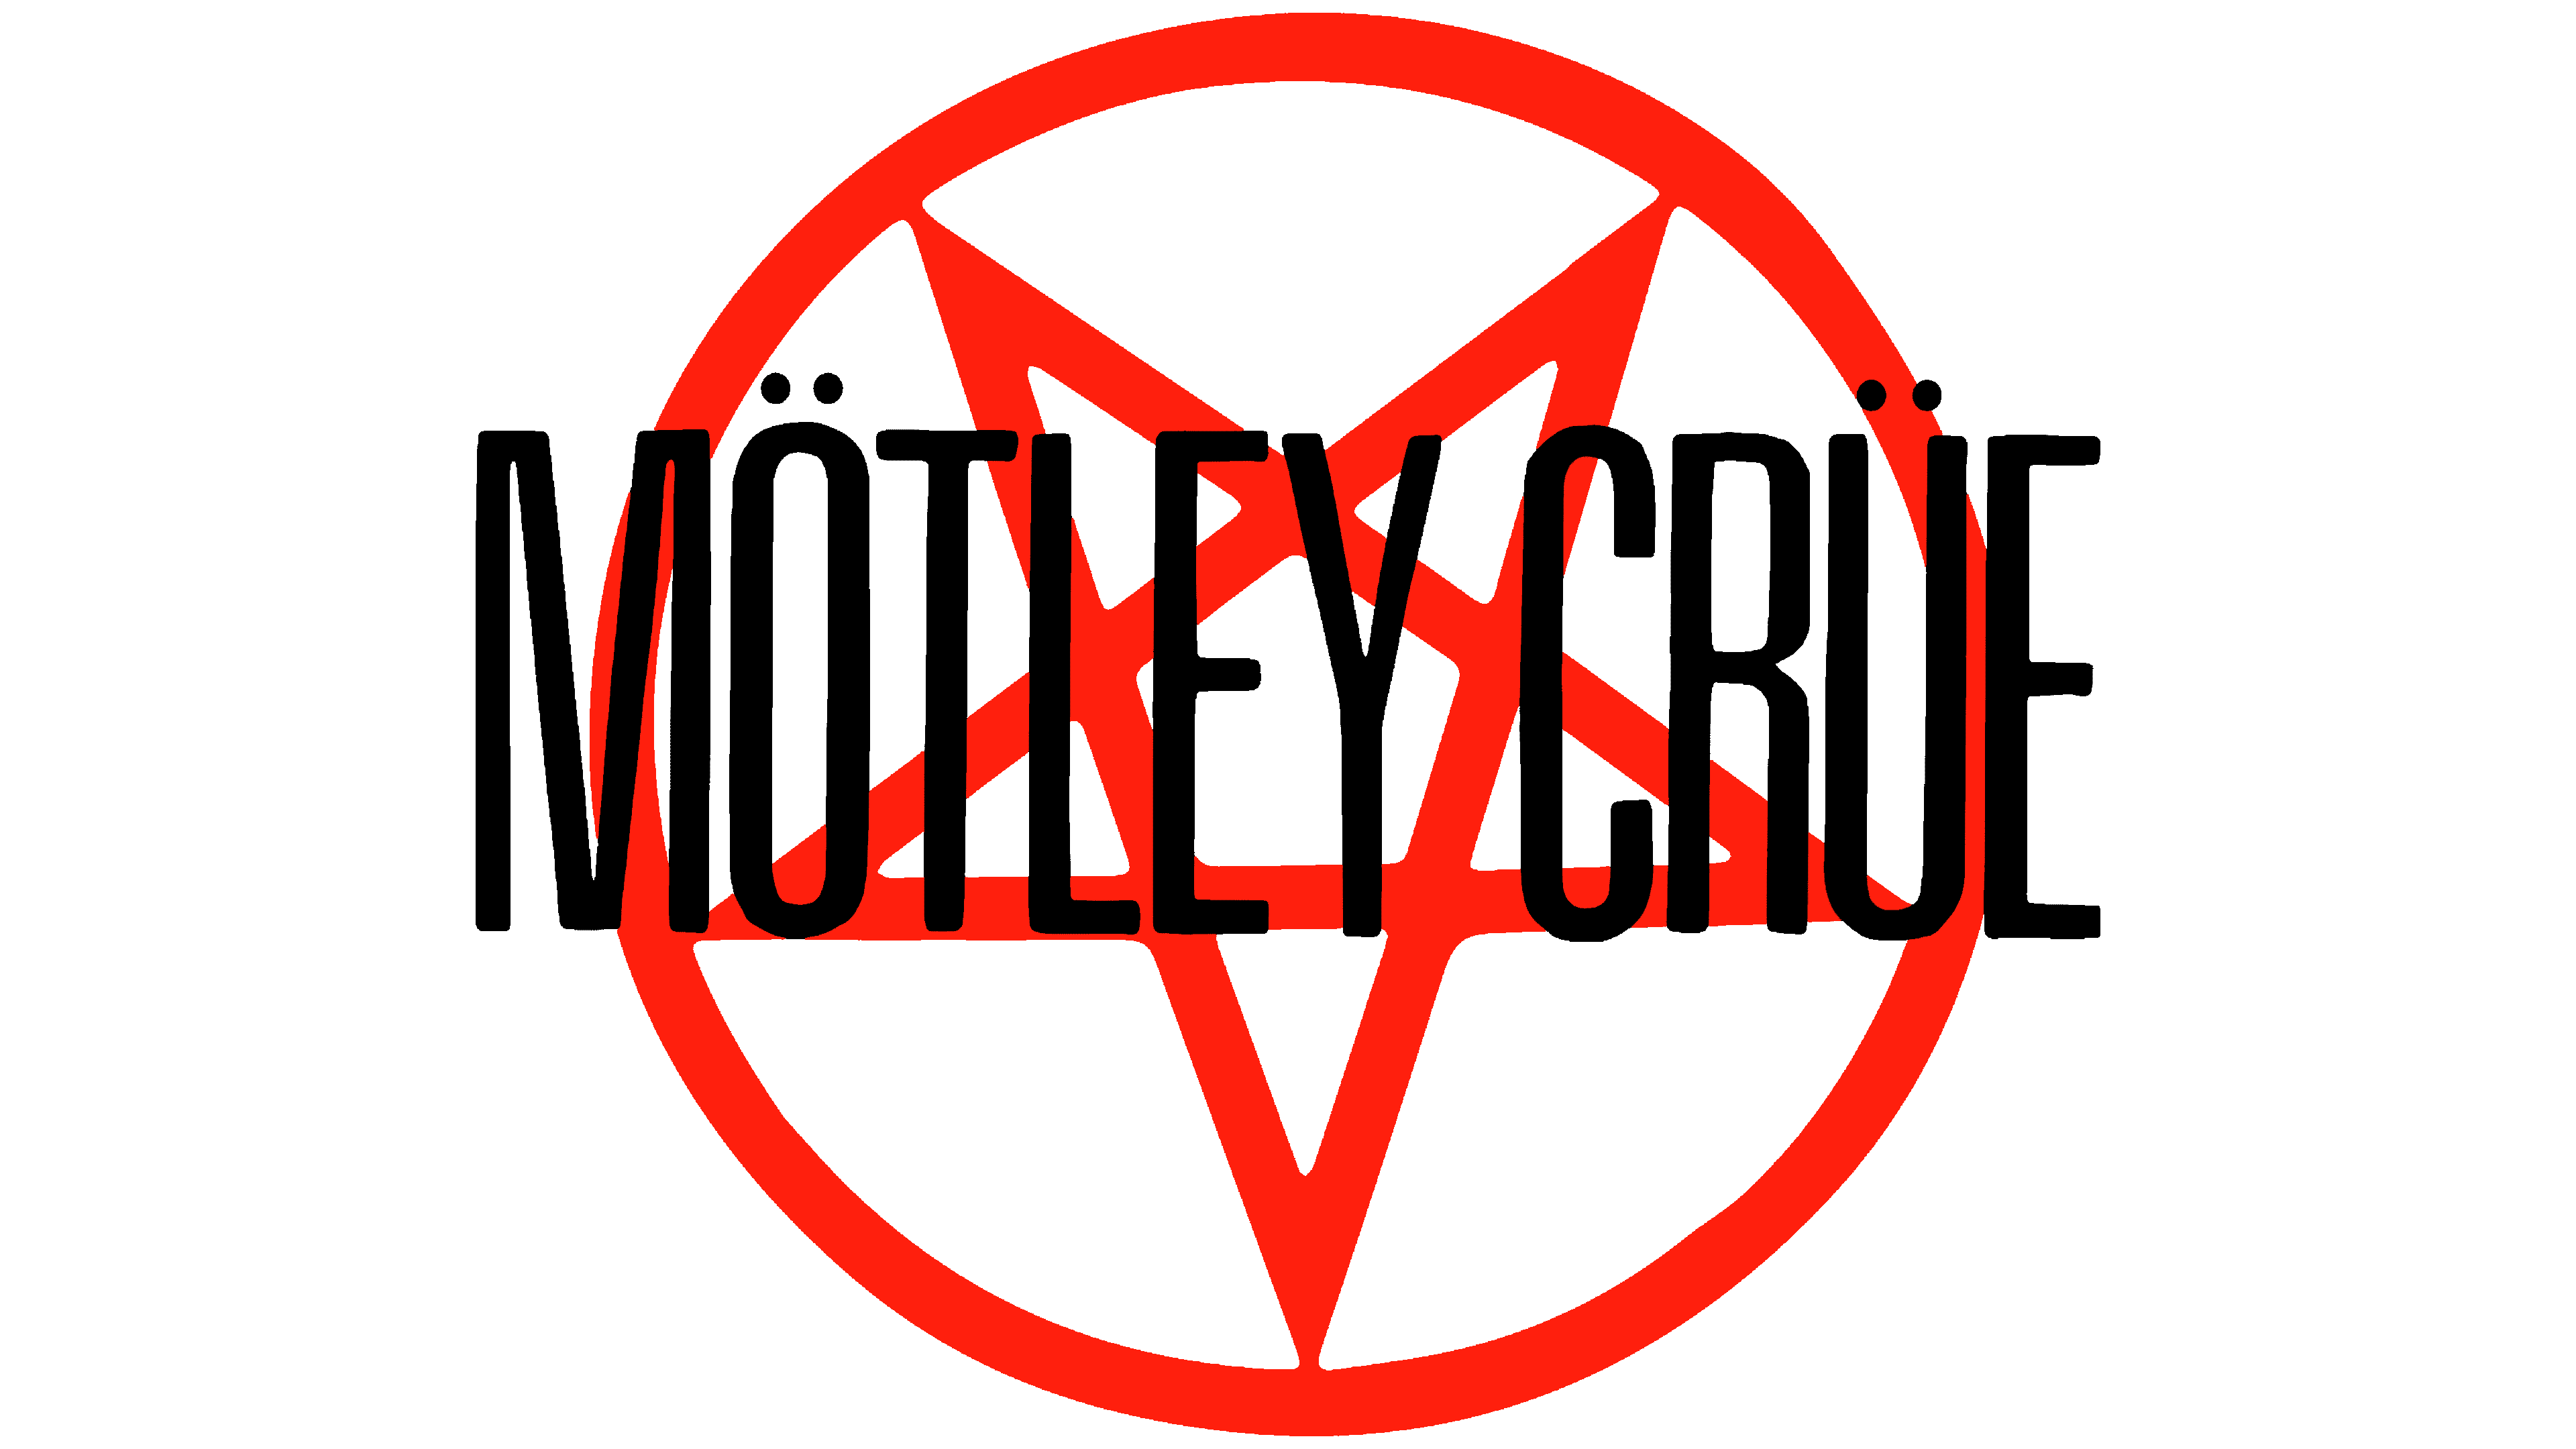 Motley meaning